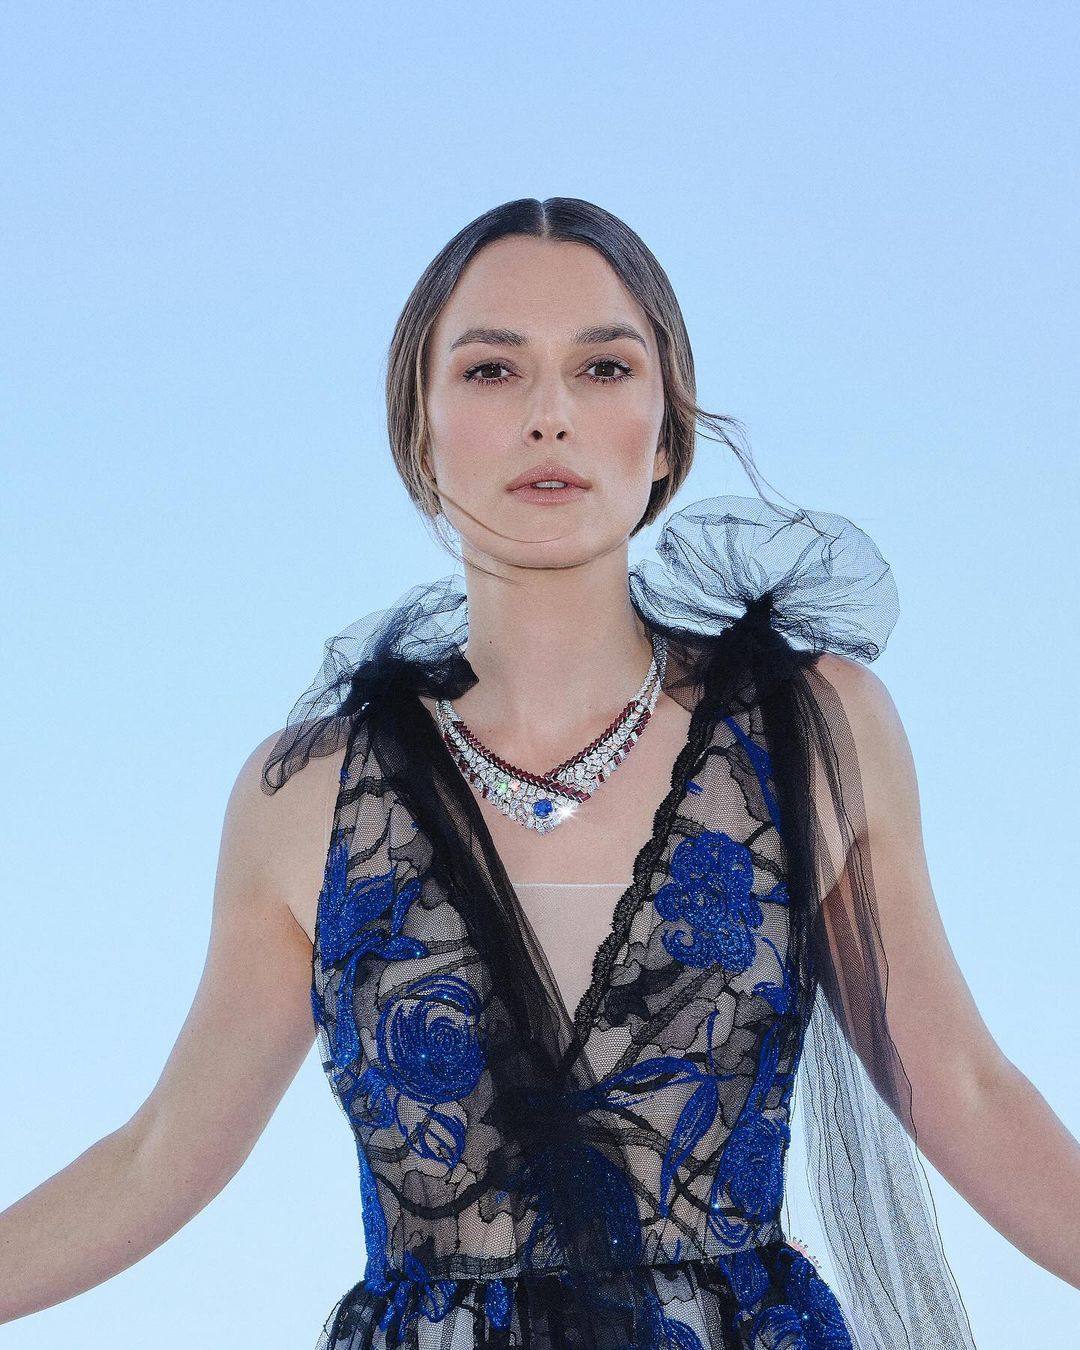 Keira Knightley at the Chanel Haute Joaillerie Sport event in Monaco, in June. Photo: @leithclarck/Instagram